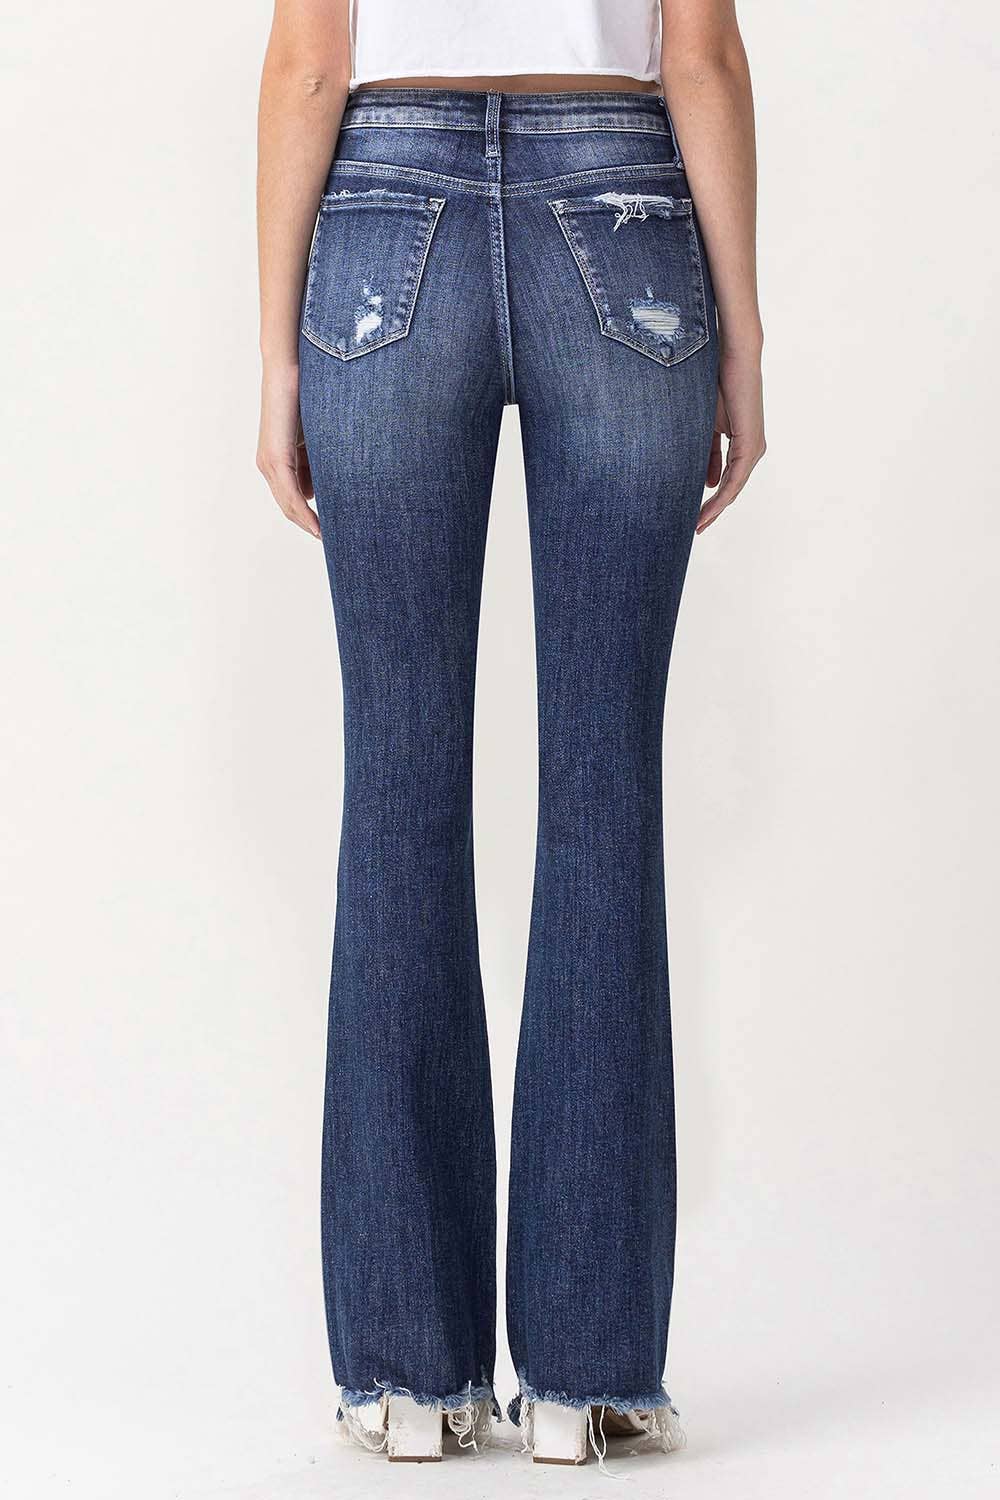 HIGH RISE FLARE JEANS: Dazzle